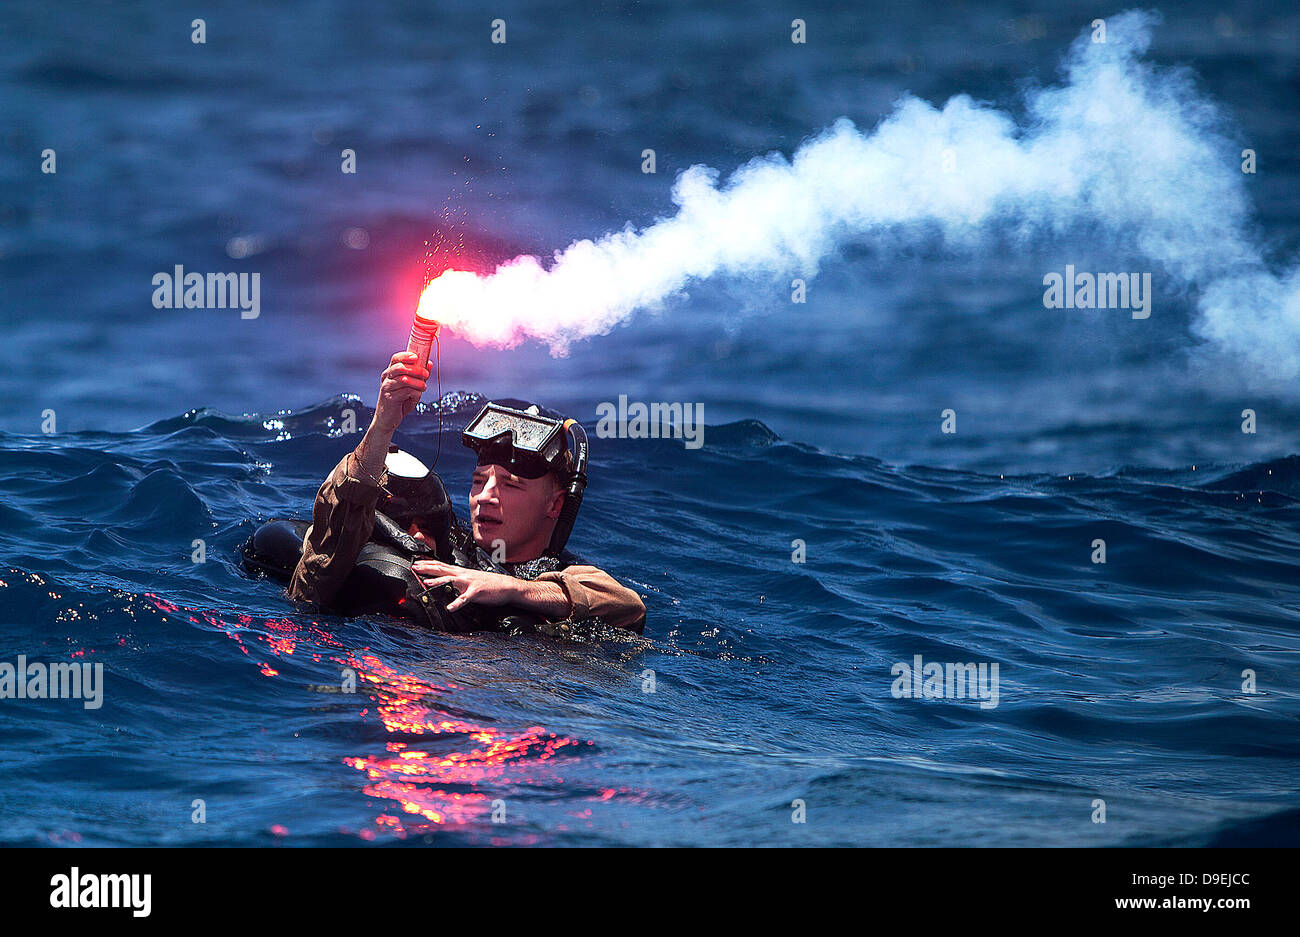 A US Marine Corps pilot with Marine Aircraft Group 24 holds a signal flare while awaiting rescue during annual mishap drill training June 11, 2013 in Kaneohe Bay, Hawaii. Stock Photo